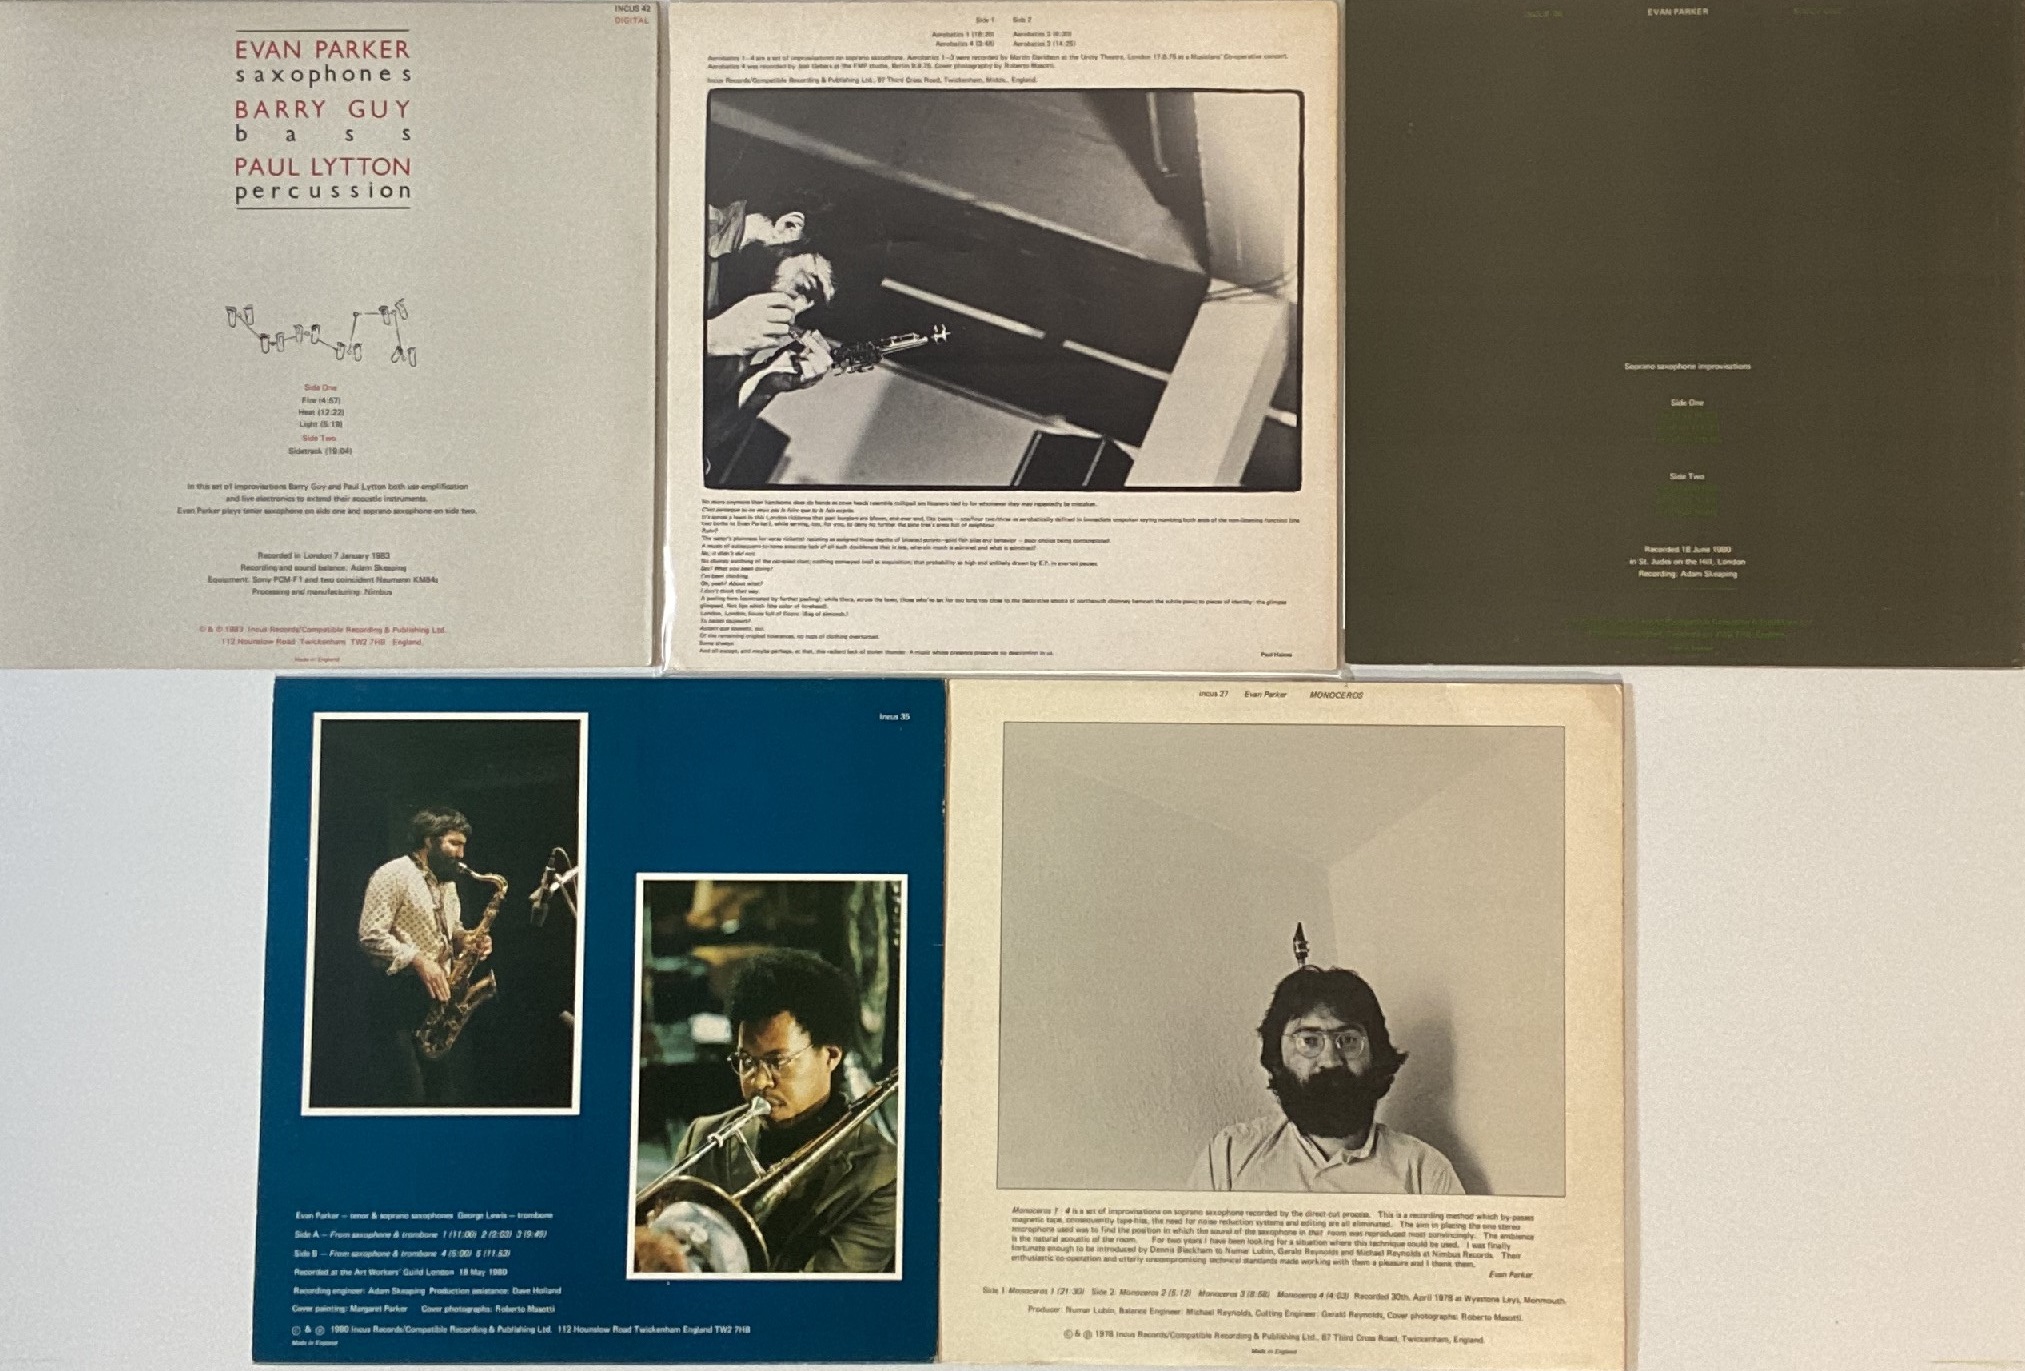 INCUS RECORDS - EVAN PARKER LPs. More on Incus with 5 featuring label co-founder Evan Parker. - Image 2 of 2